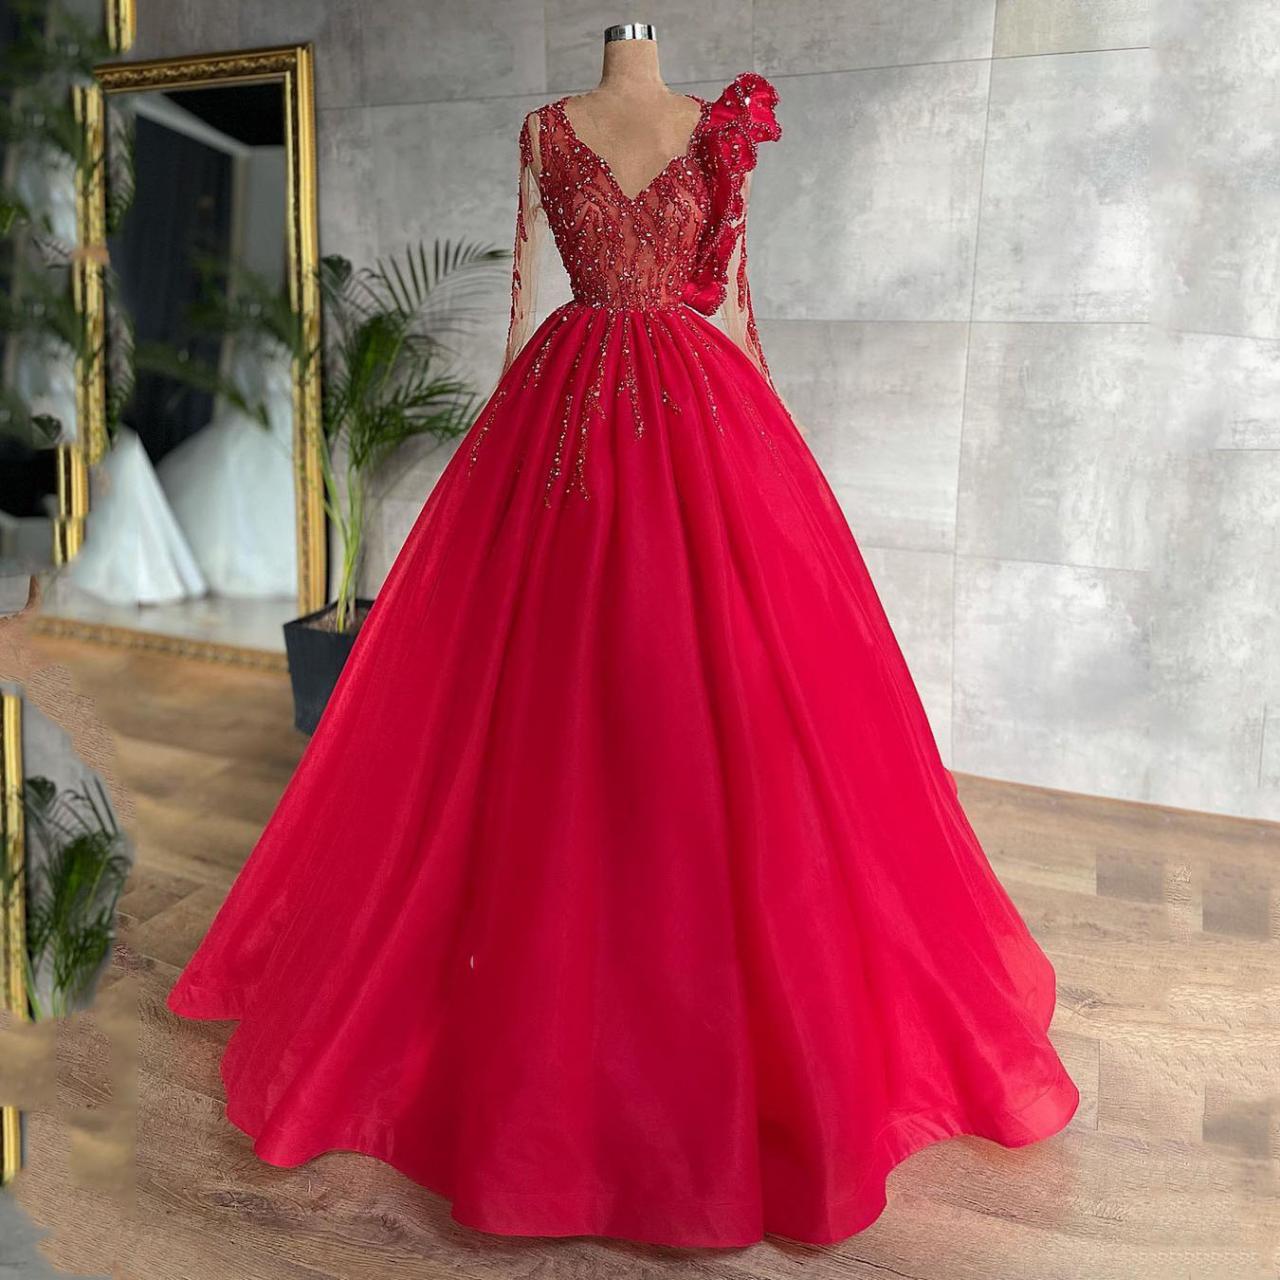 Red Elegant Evening Dresses Luxury Long Sleeve Sequins Sparkly Ball Gown Women Formal Prom Party Gowns Plus Size Custom Made